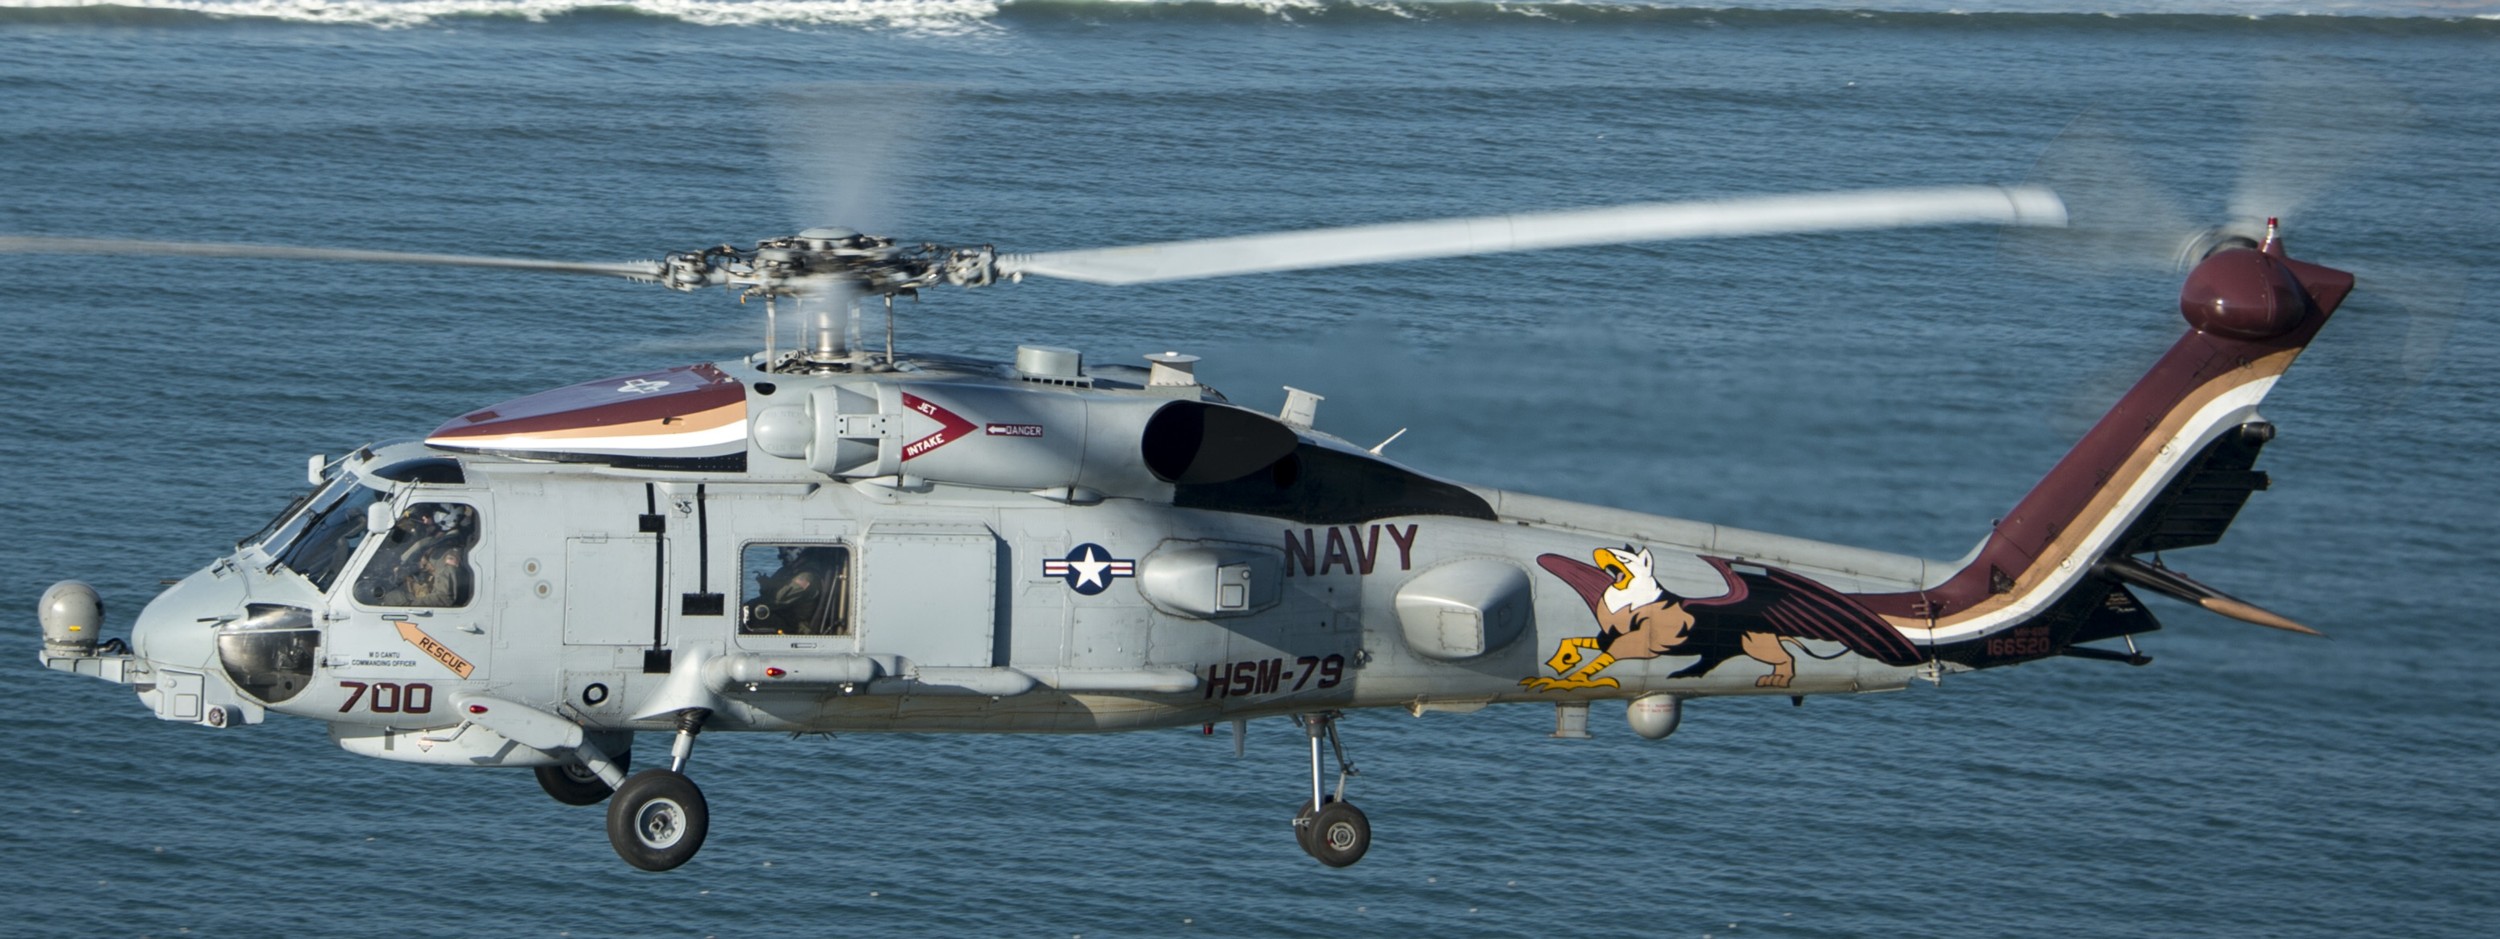 hsm-79 griffins helicopter maritime strike squadron mh-60r seahawk us navy nas north island san diego 02